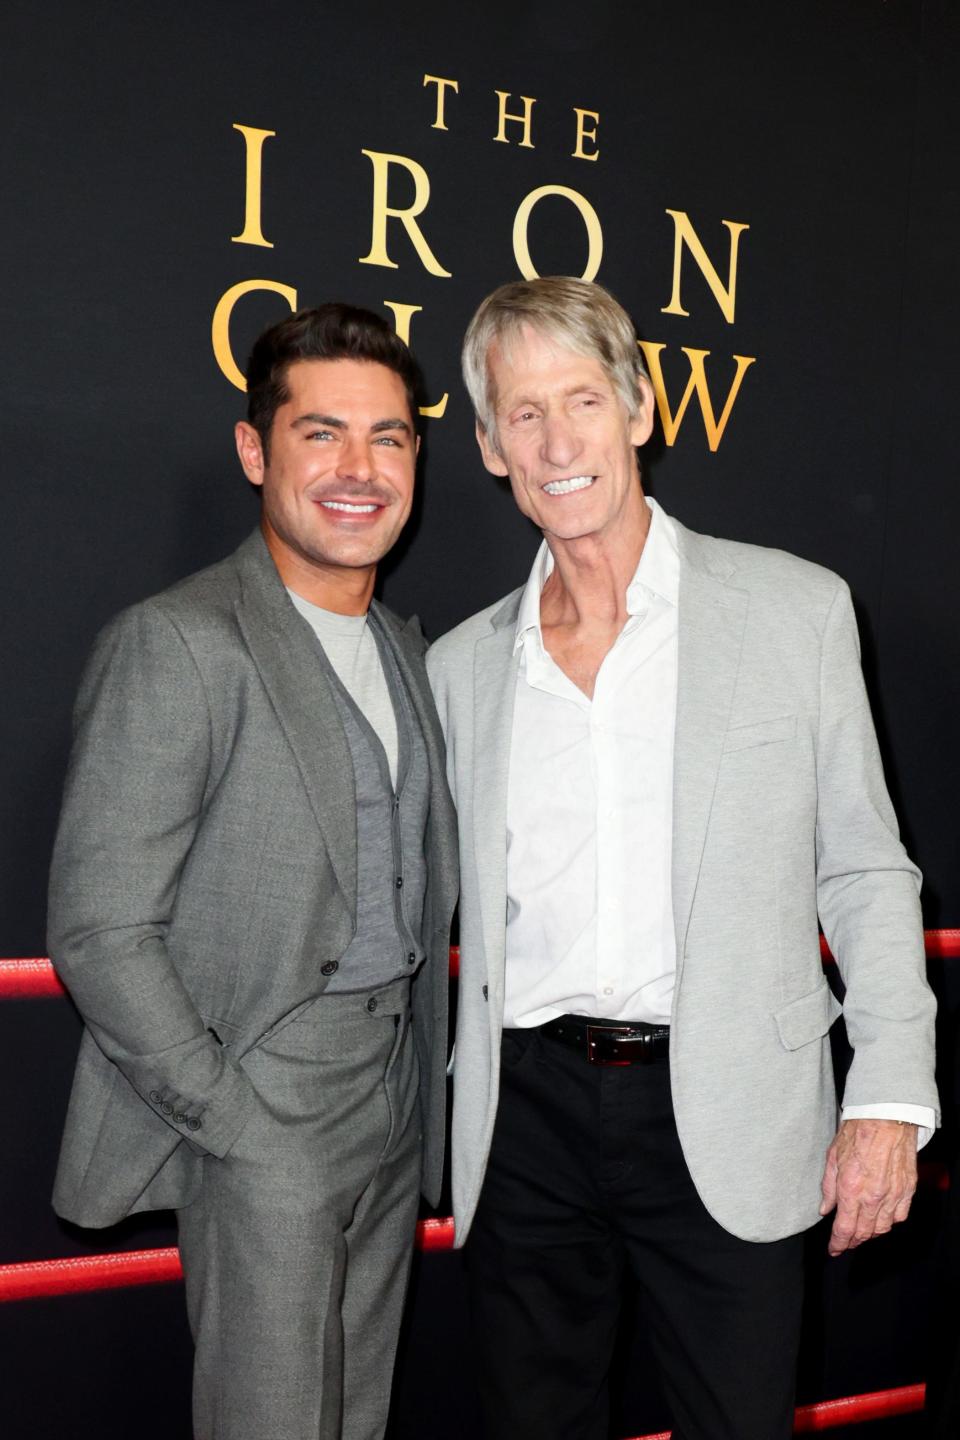 Zac Efron (left) and the real Kevin Von Erich attend the Hollywood premiere of "The Iron Claw."